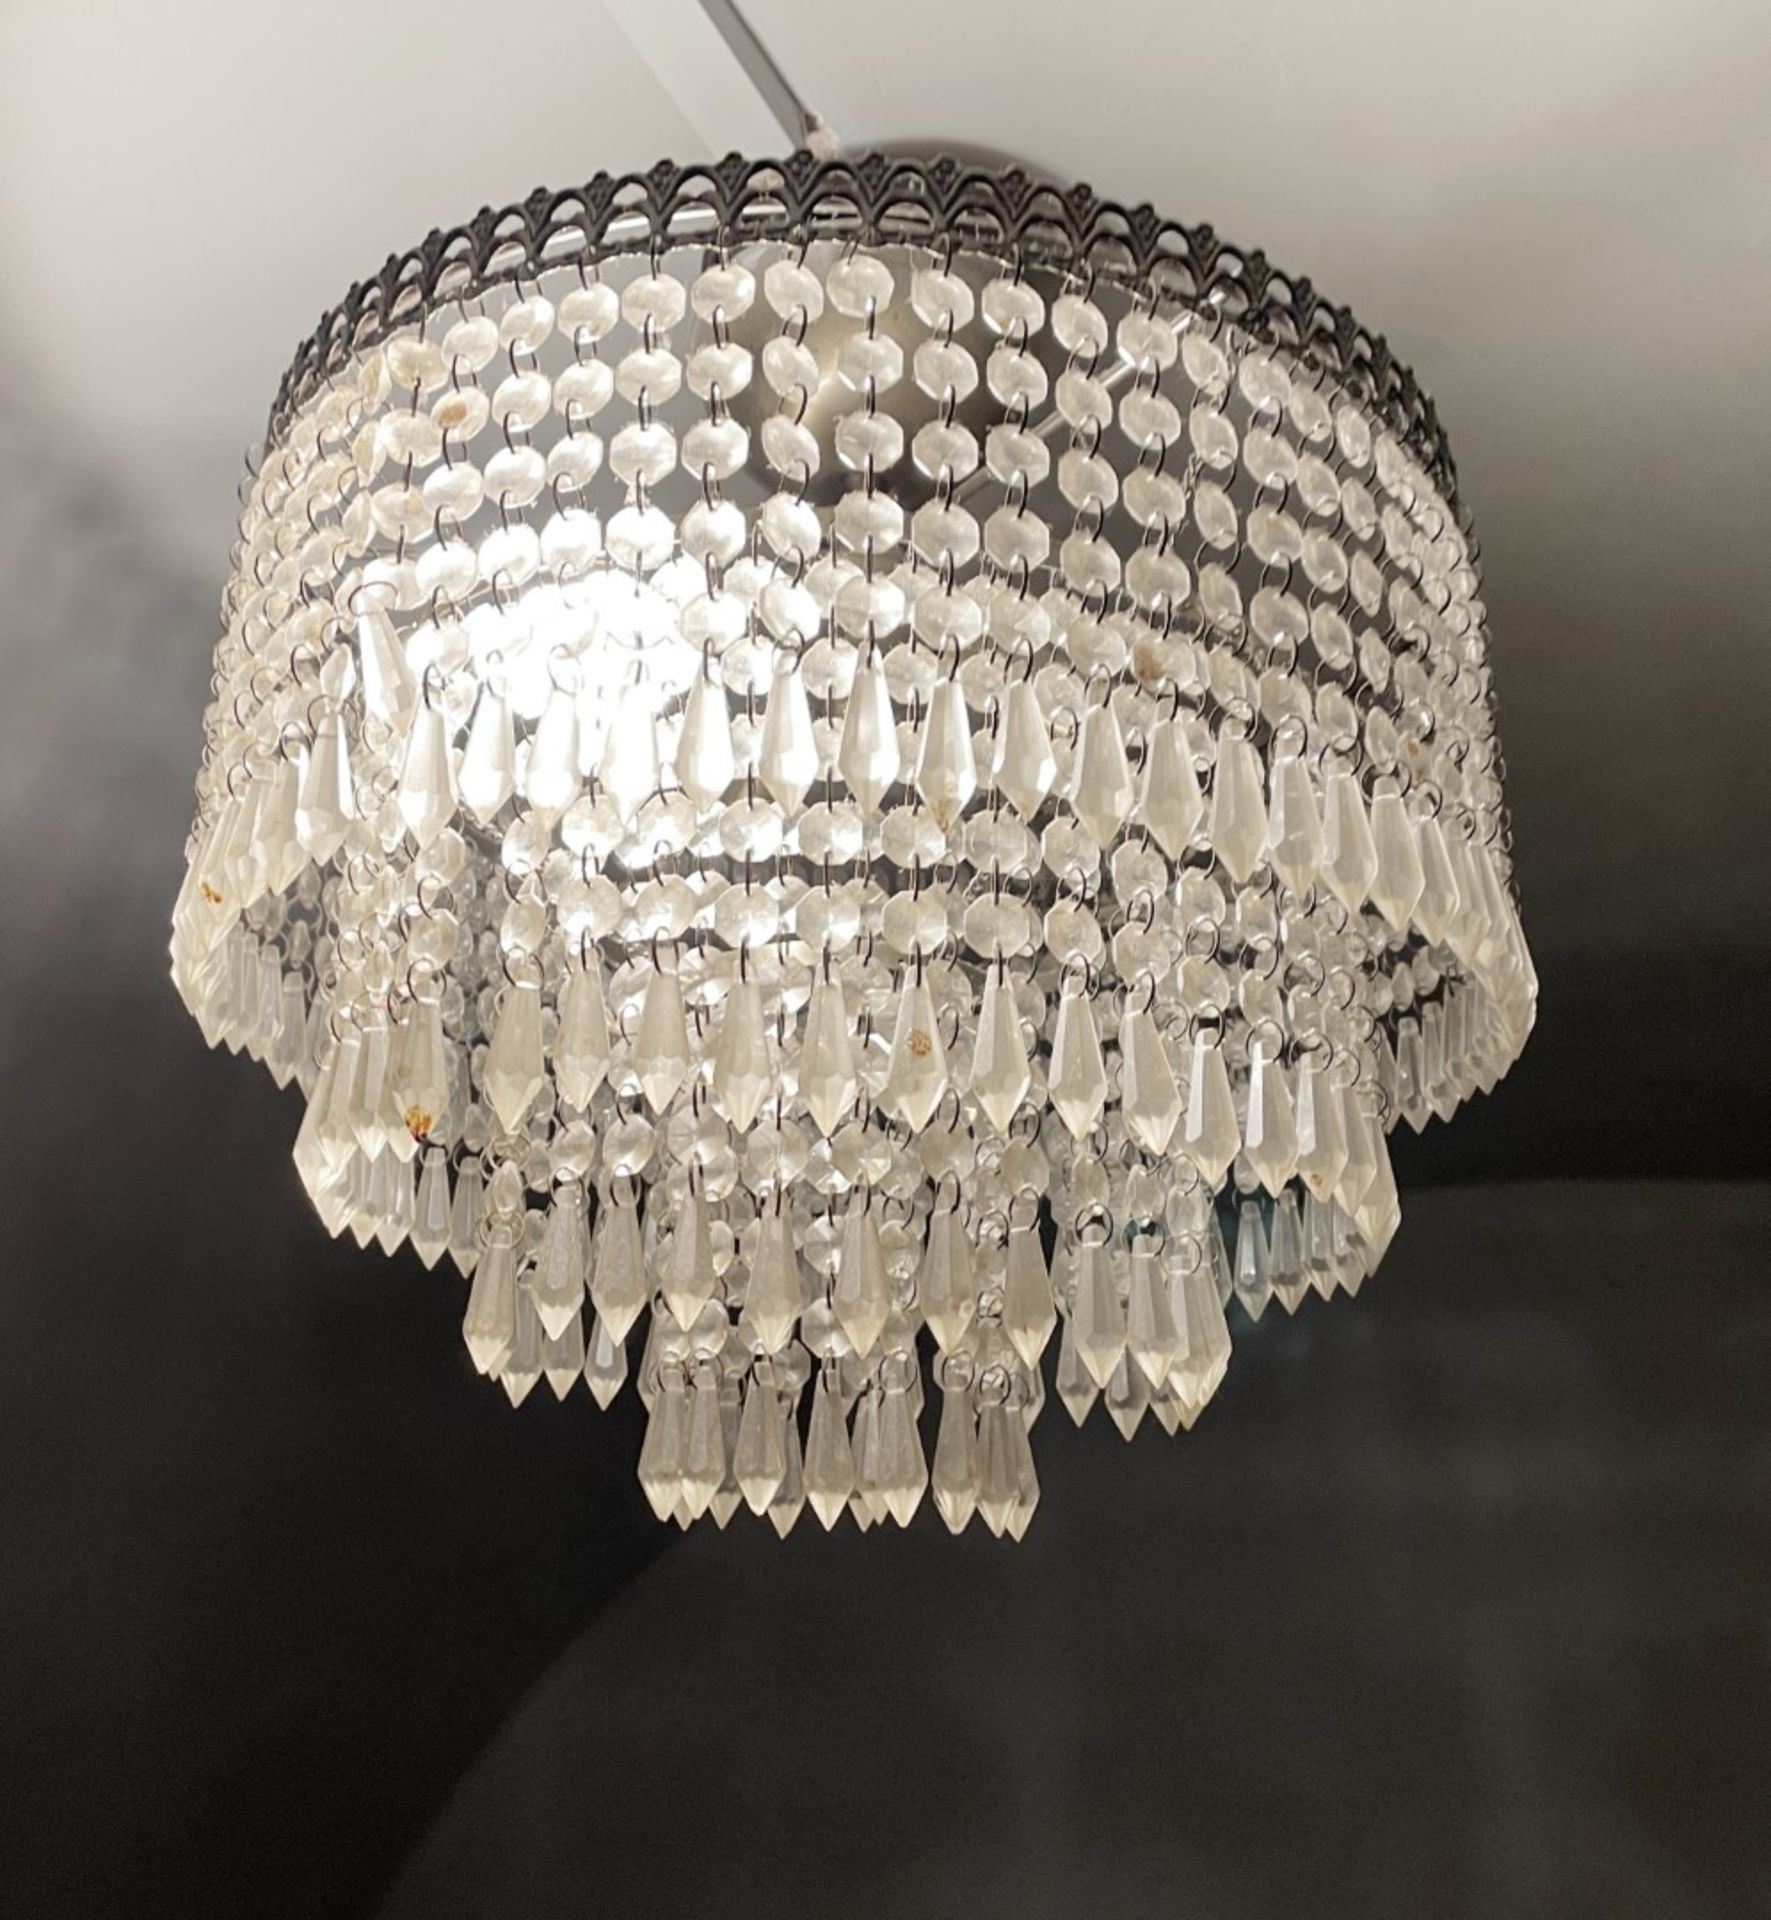 1 x Vintage Ceiling Pendant Chandelier Light Fitting Adorned with 4-Tiers of Glass - Image 2 of 5